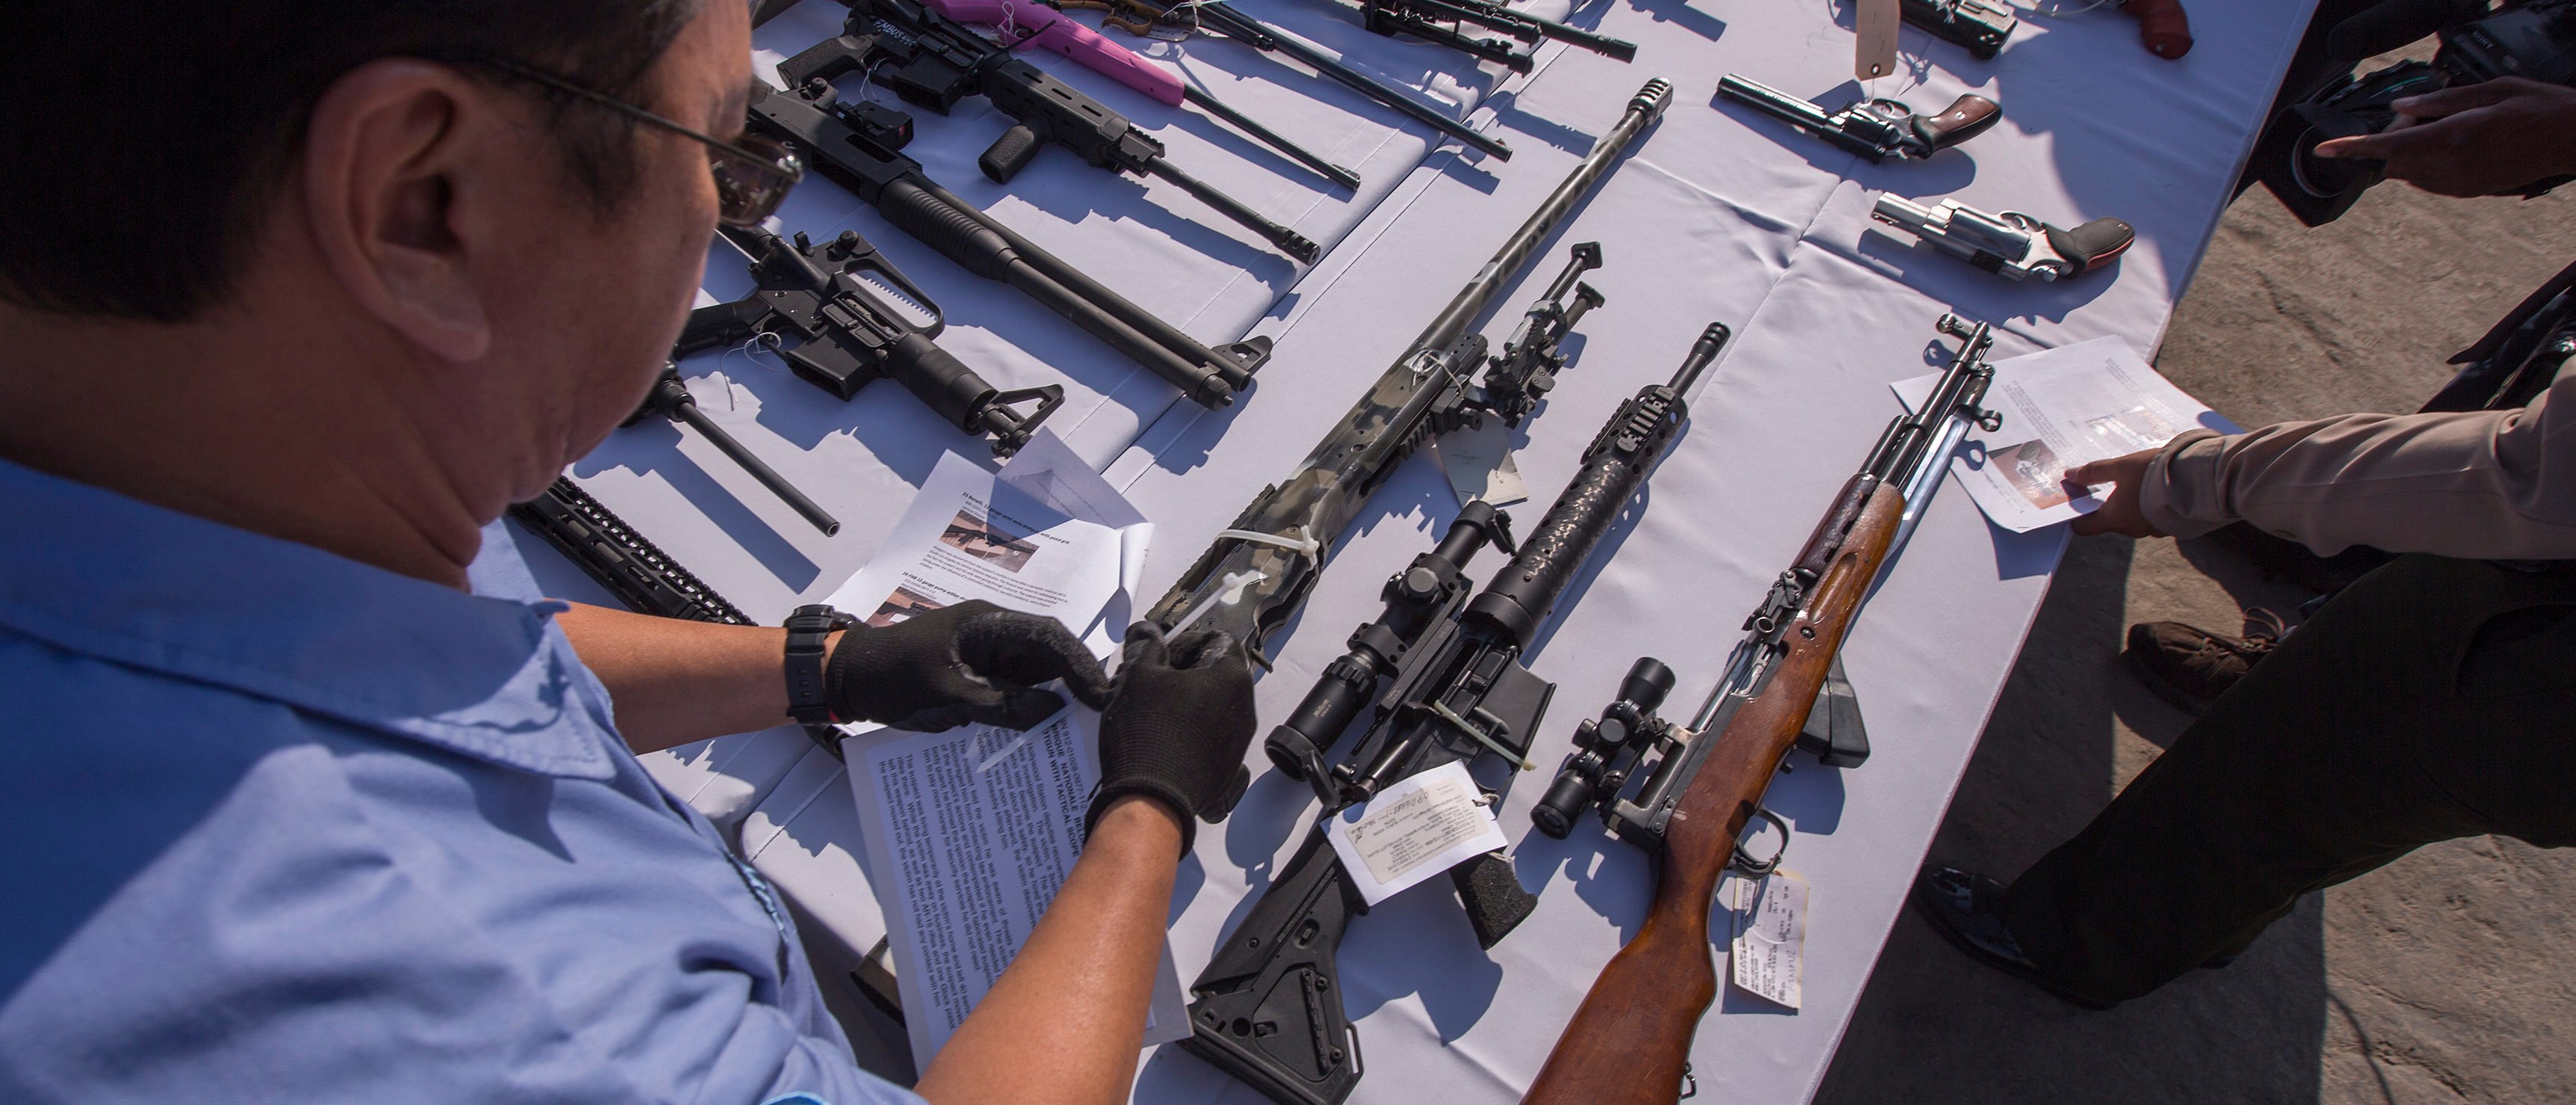 Deputies handle some of approximately 3,500 confiscated guns to be melted down at Gerdau Steel Mill on July 19, 2018 in Rancho Cucamonga, California. (Photo by David McNew/Getty Images)